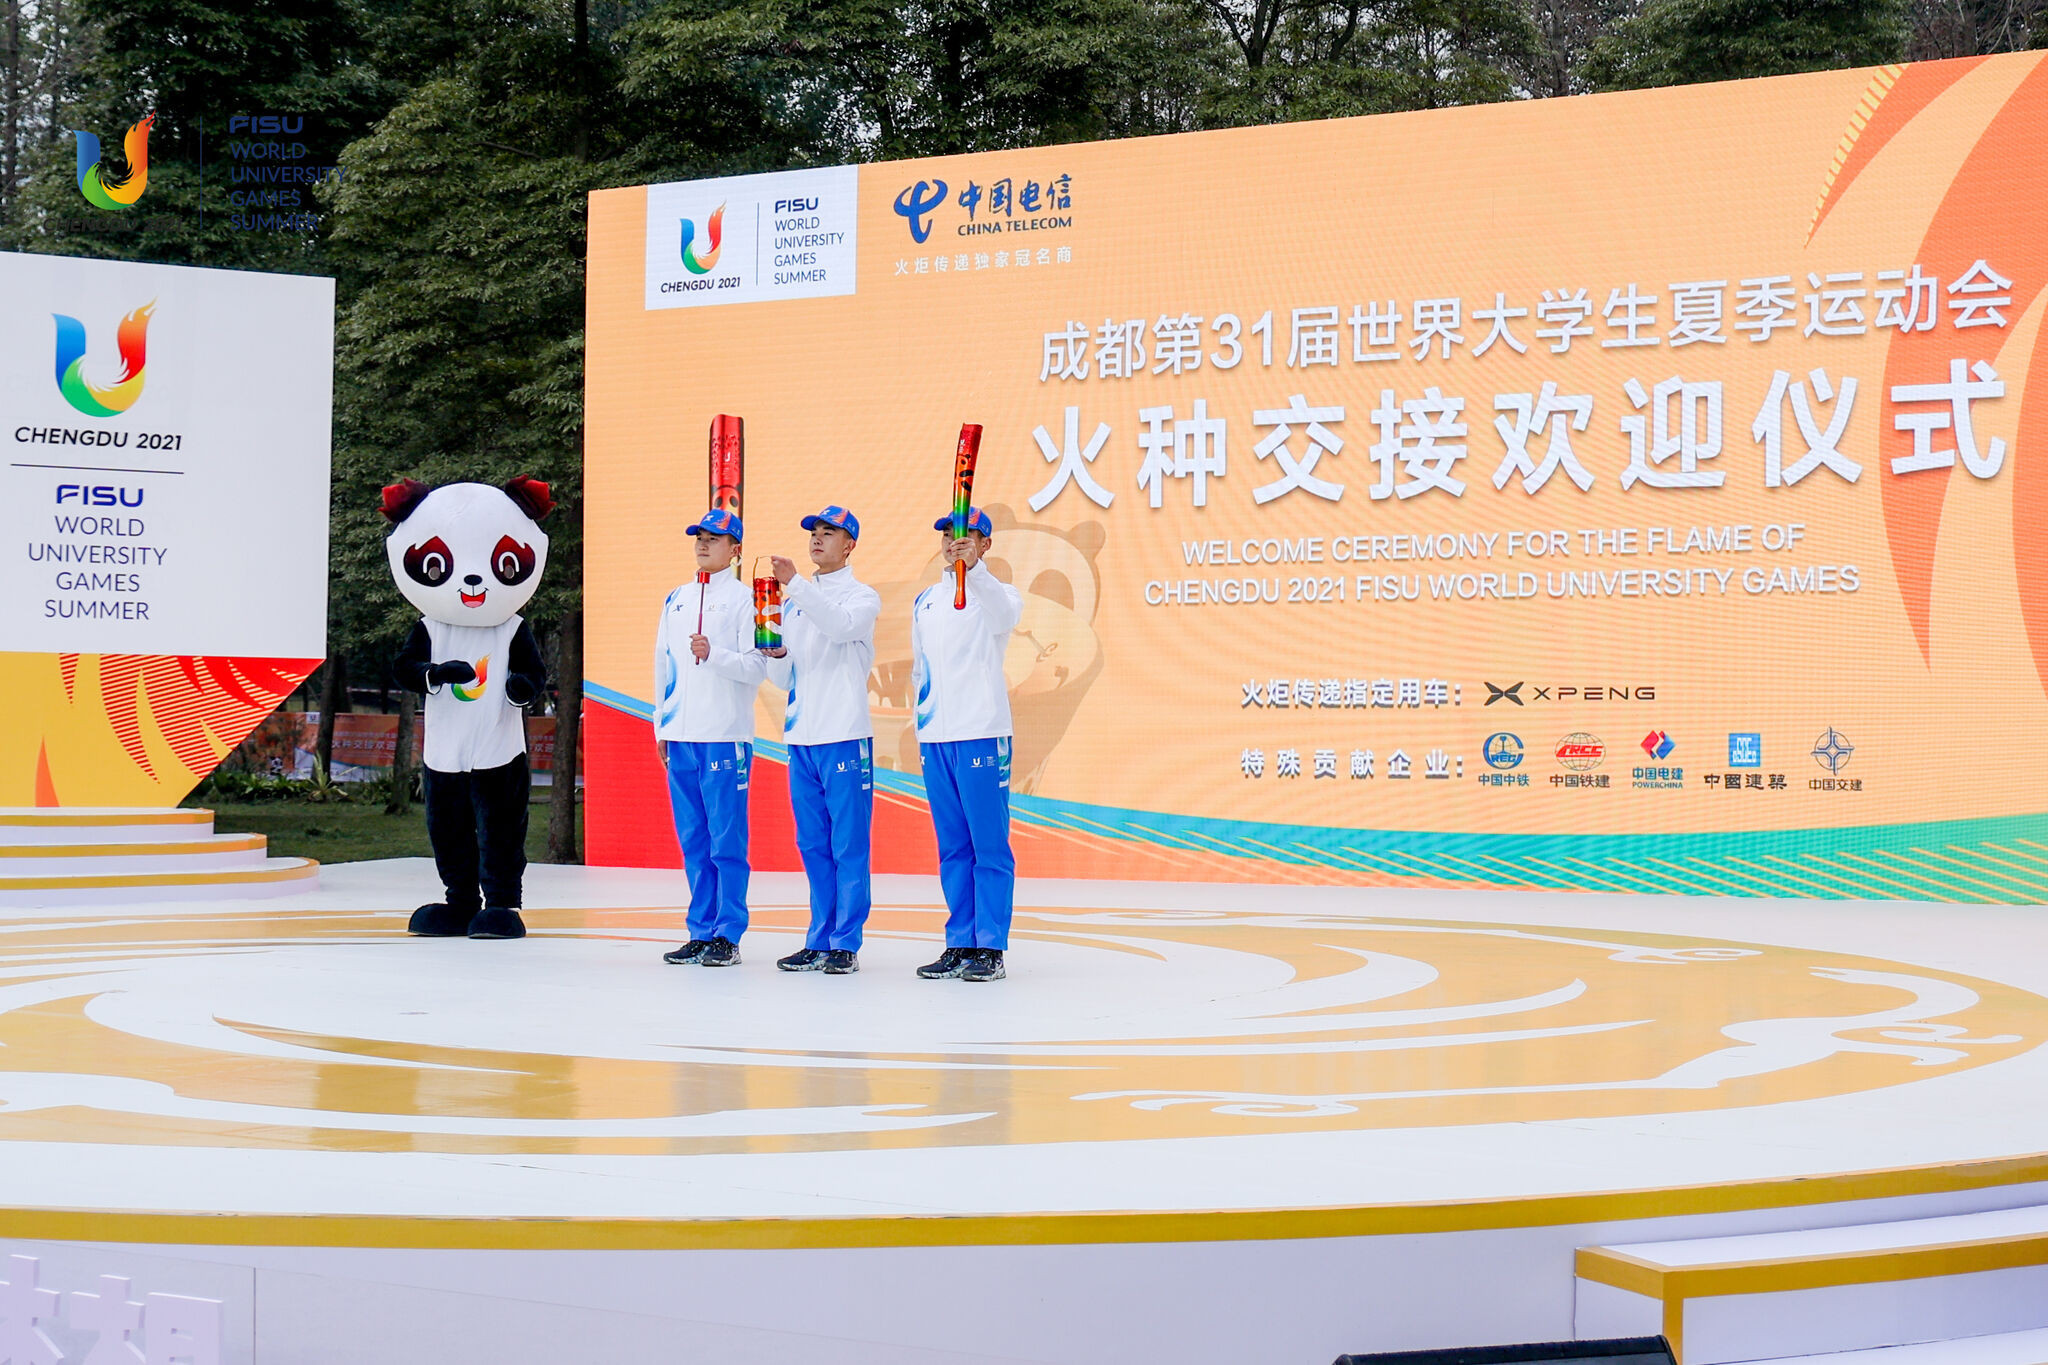 The FISU Torch arrived in Chengdu for the handover ceremony ©Getty Images